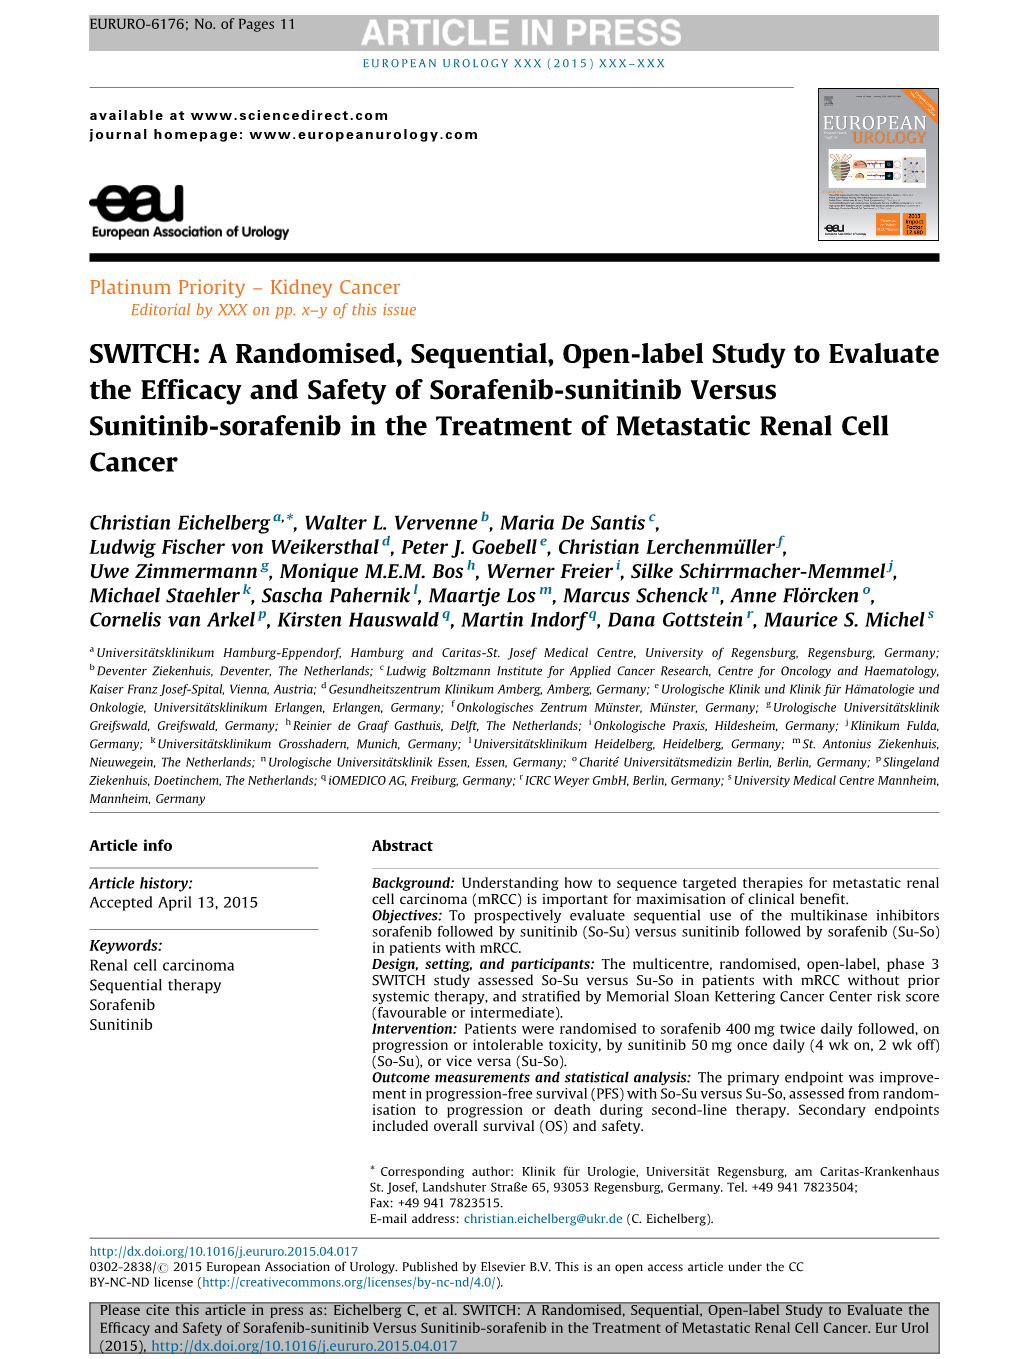 SWITCH: a Randomised, Sequential, Open-Label Study to Evaluate